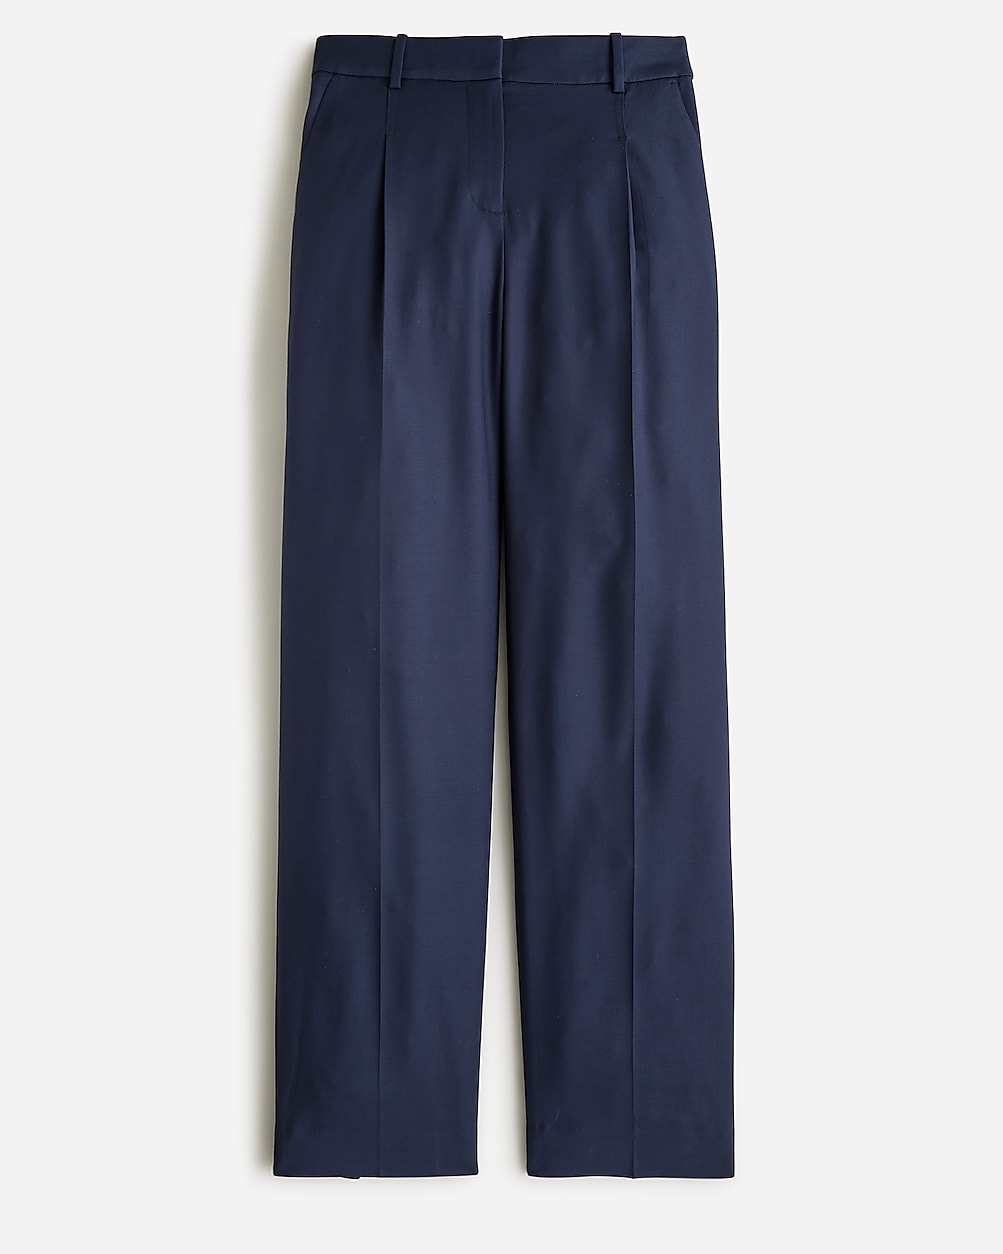 Essential pant in city twill